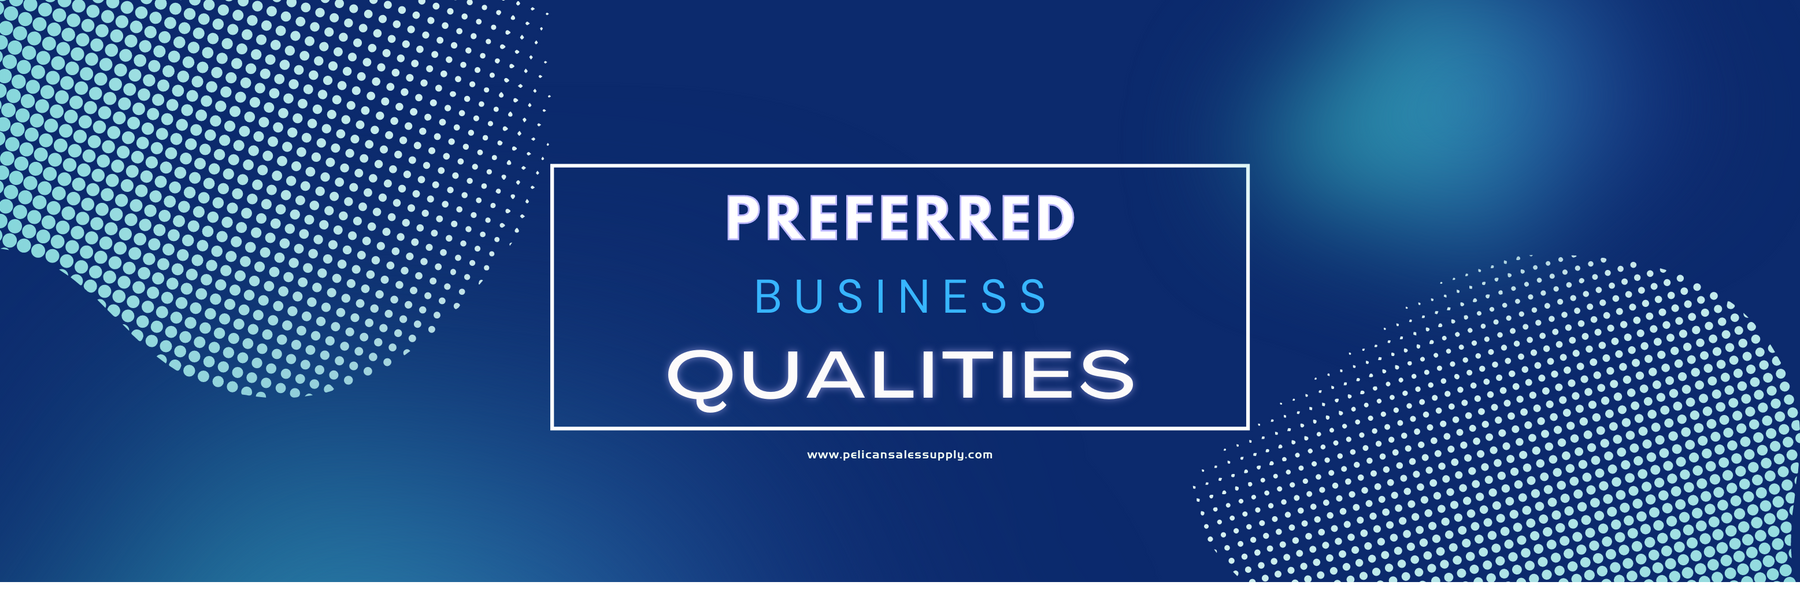 What type of company do people prefer to do business with, and what are the qualities that make a company stand out?